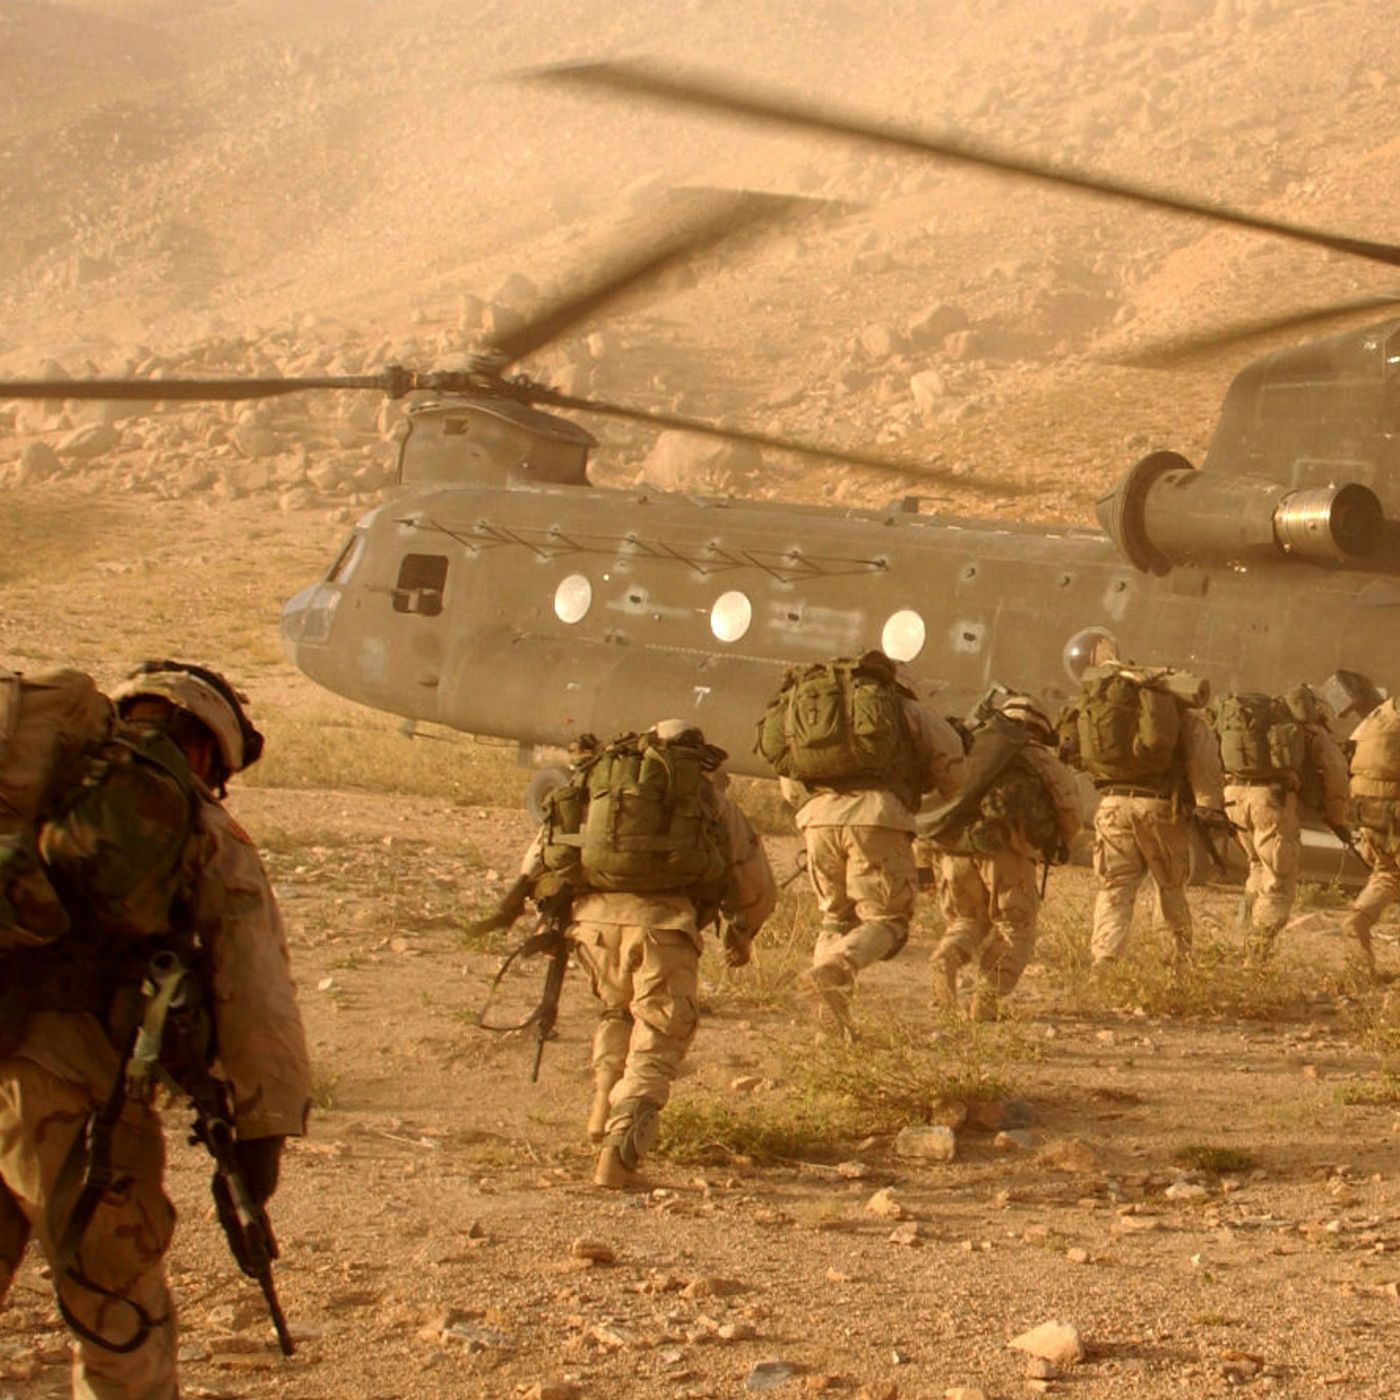 Episode 519: Going Sideways in Afghanistan & Iraq, with Daniel P. Bolger